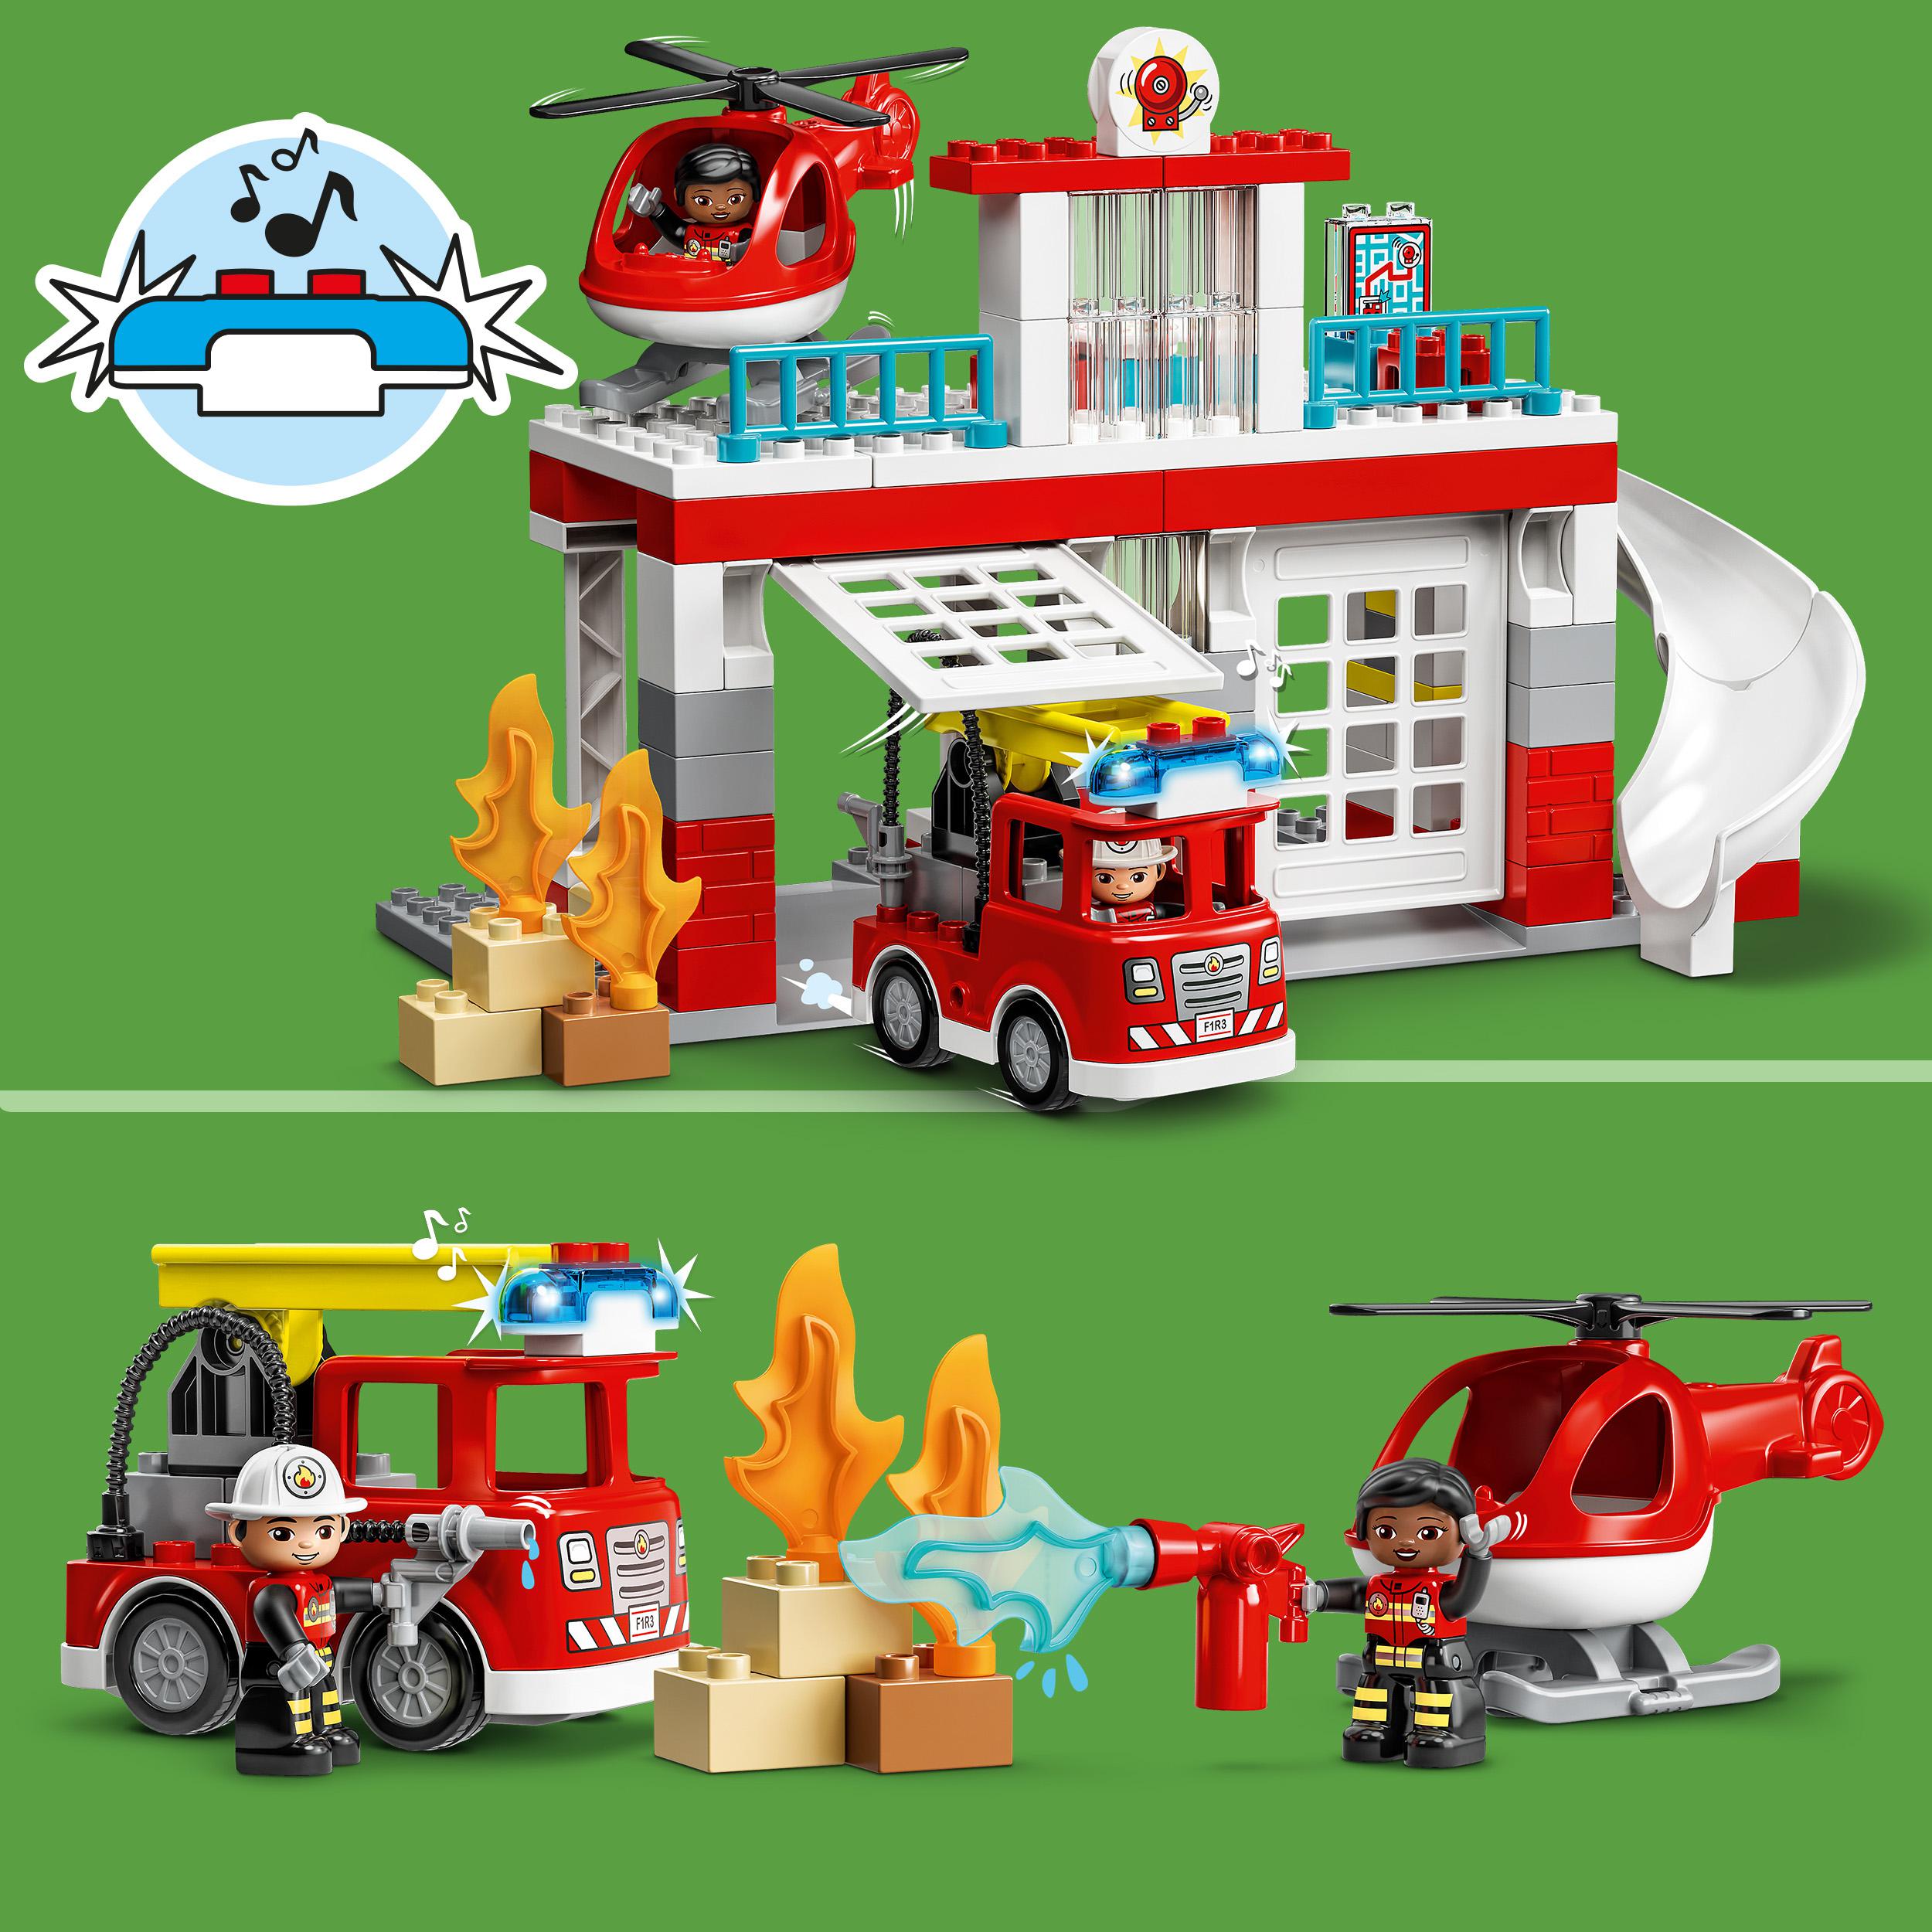 Fire Station & Helicopter